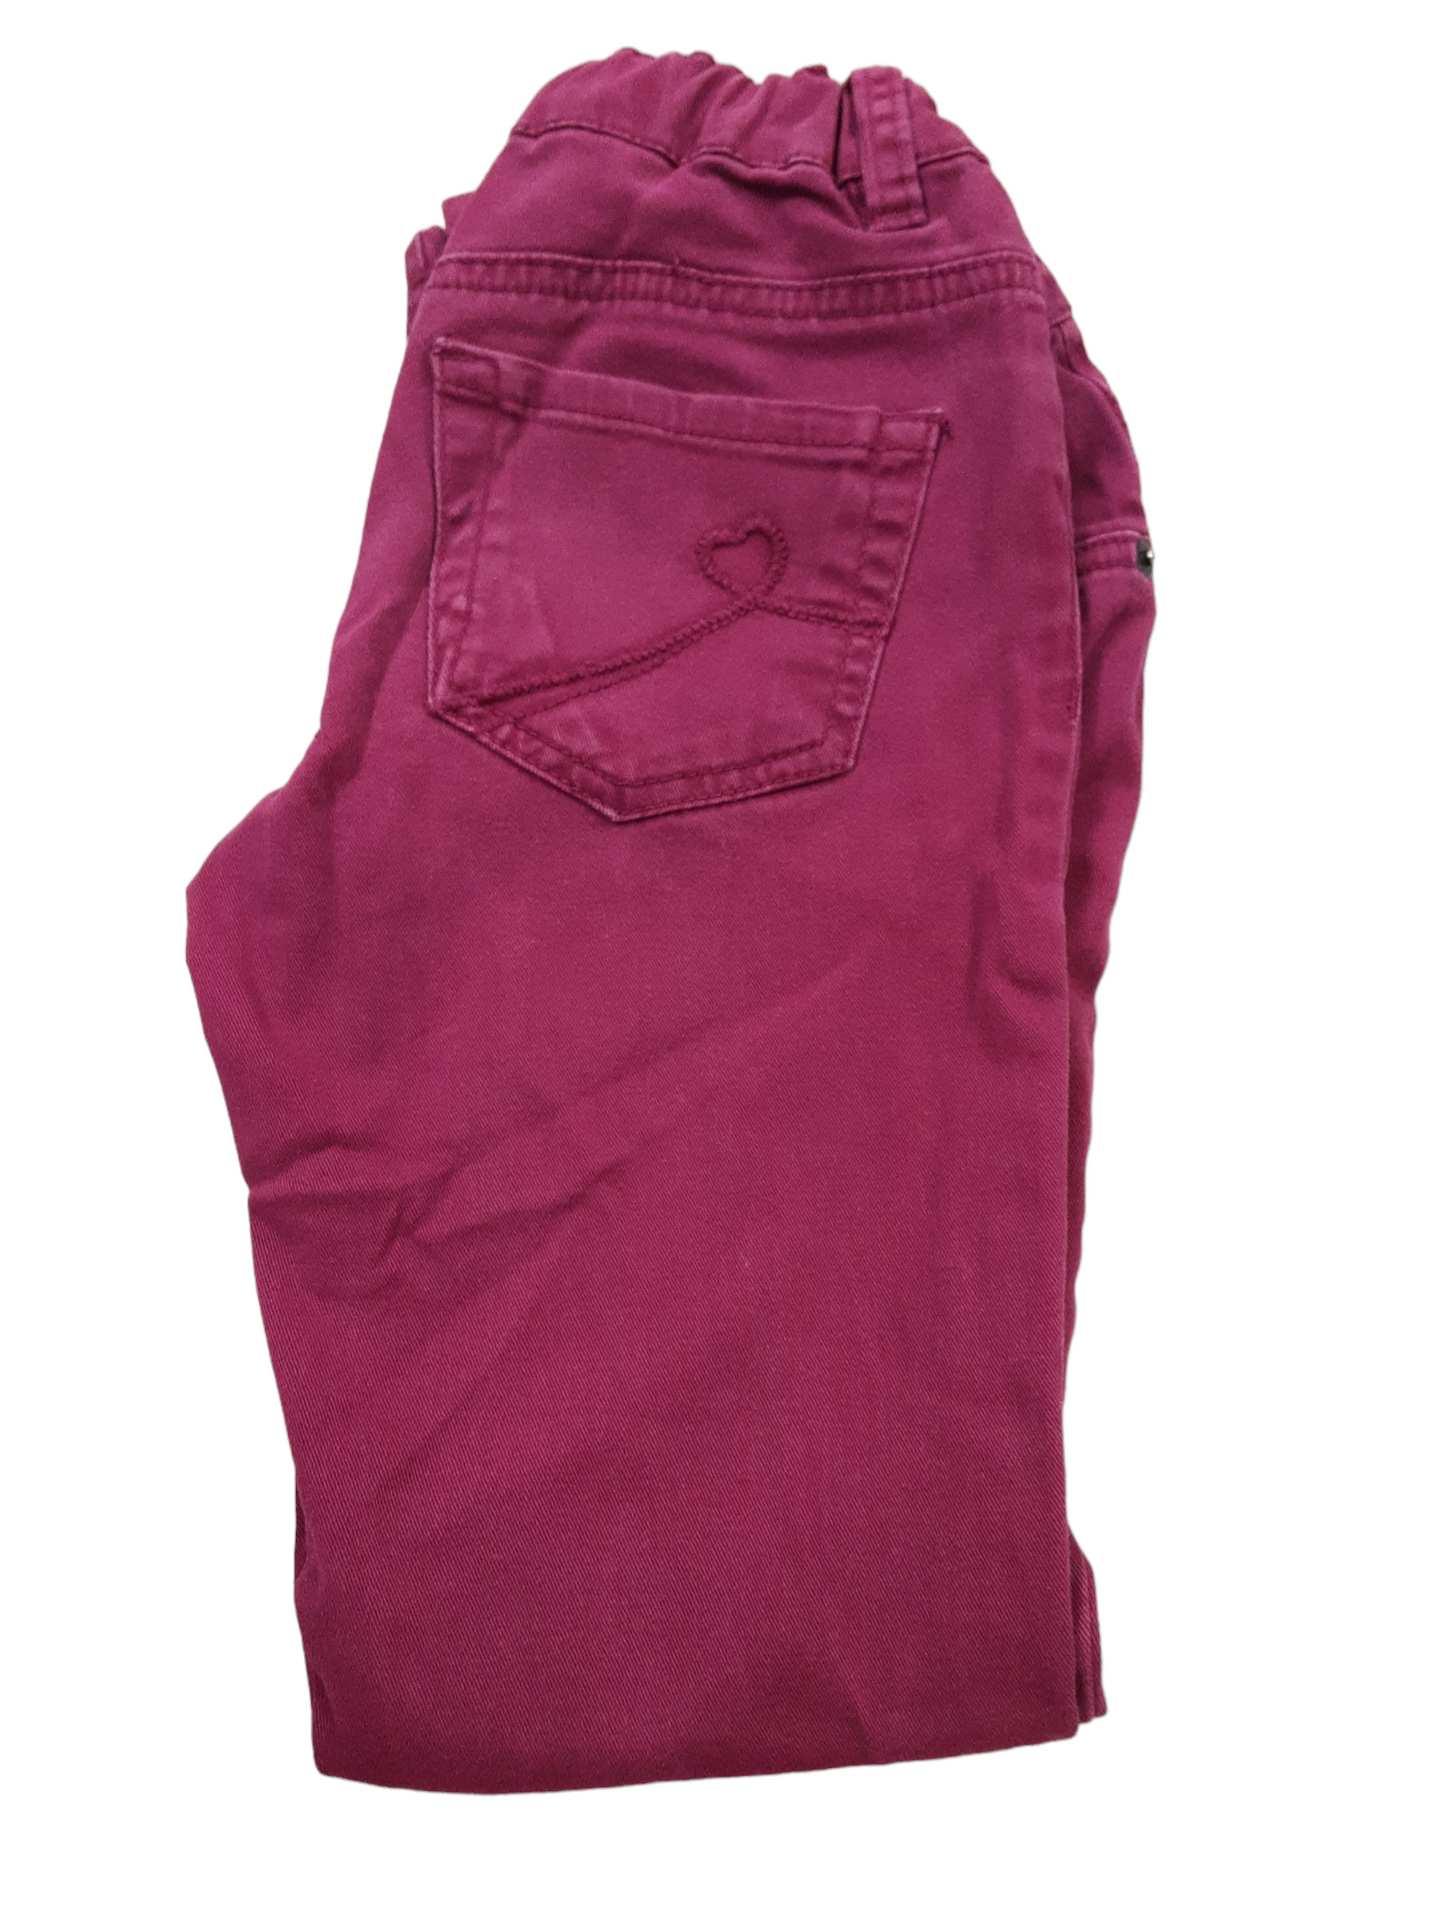 Berry jegging size 8